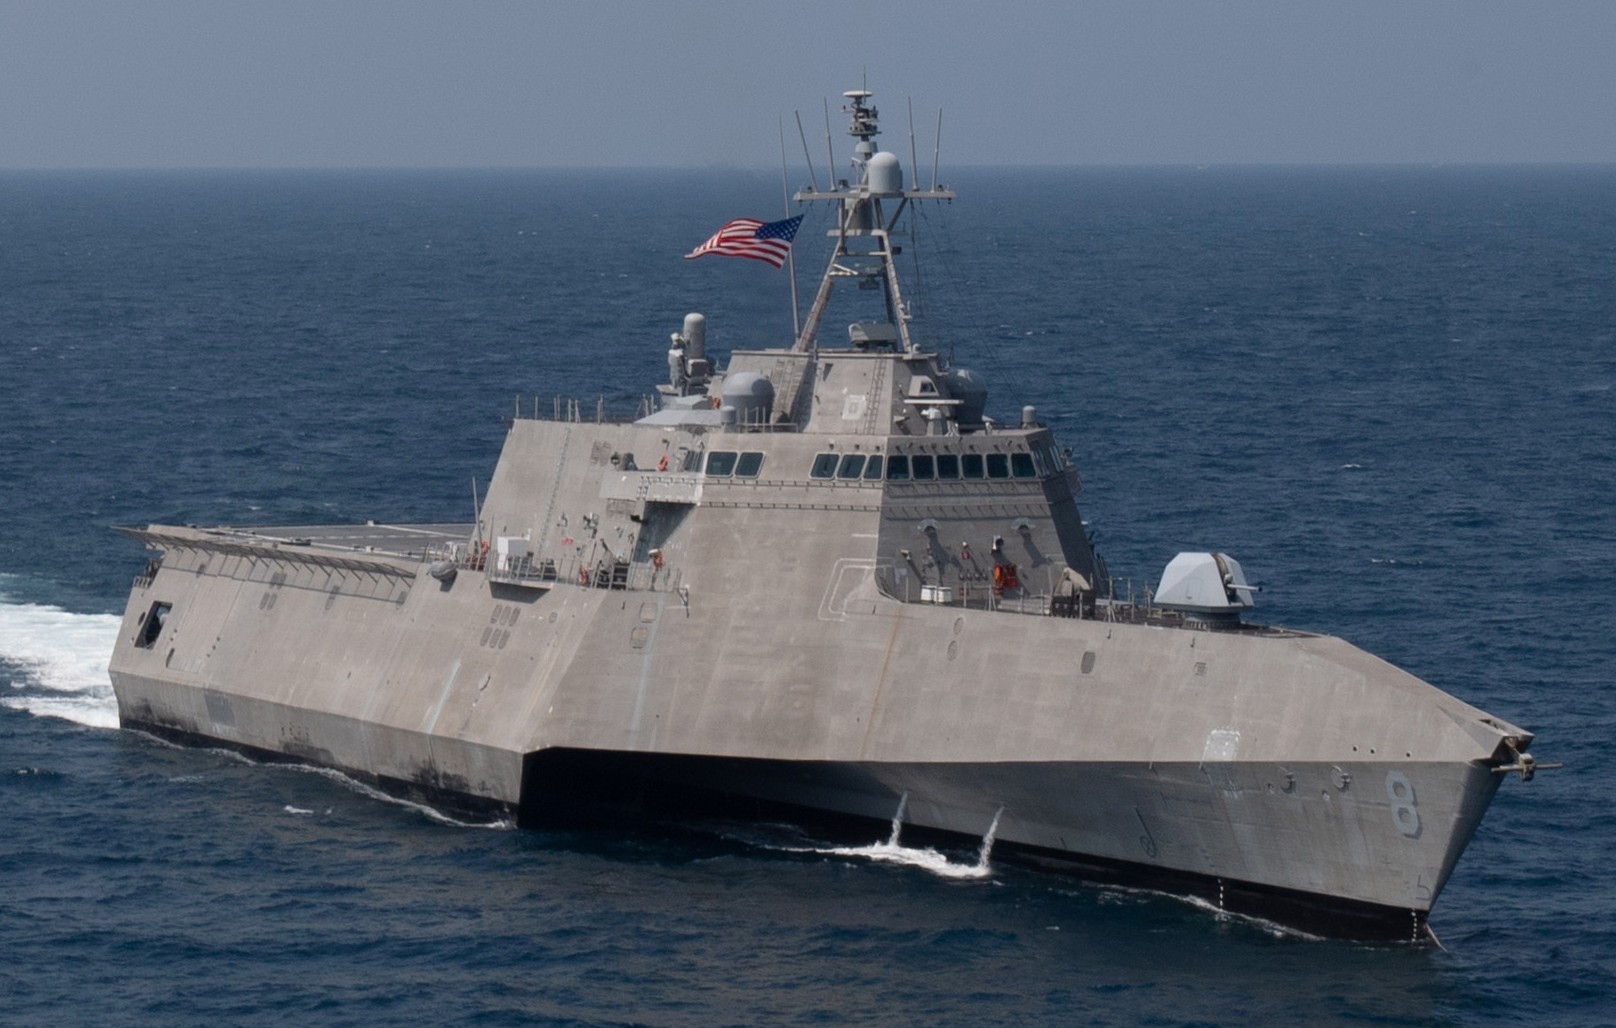 lcs-8 uss montgomery independence class littoral combat ship us navy 31 aumx exercise gulf of thailand